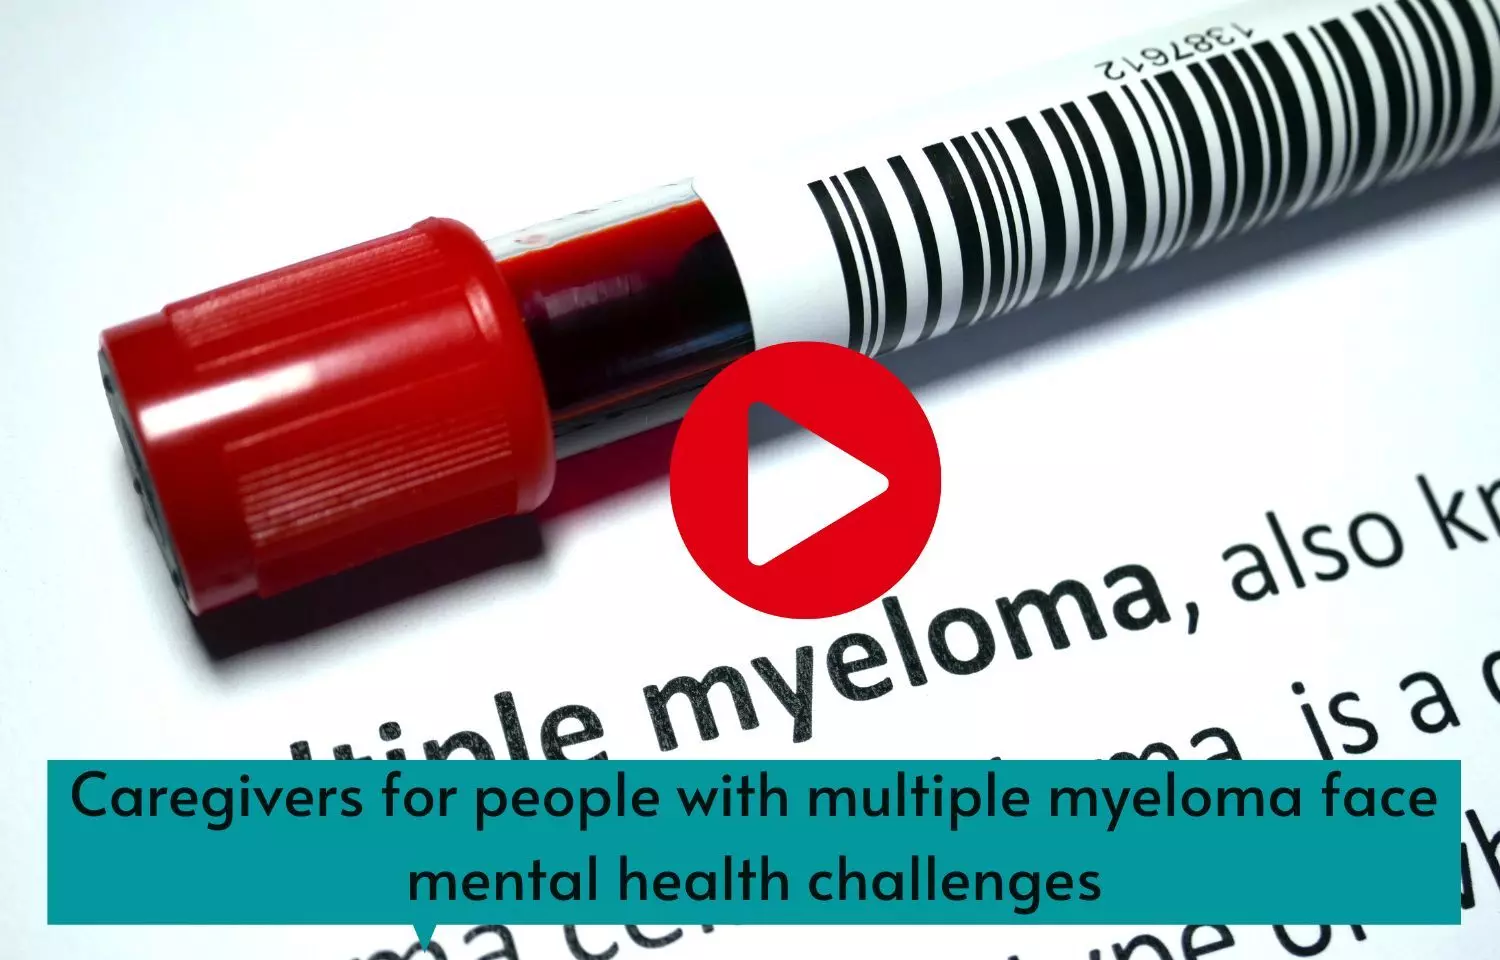 Caregivers for people with multiple myeloma face mental health challenges